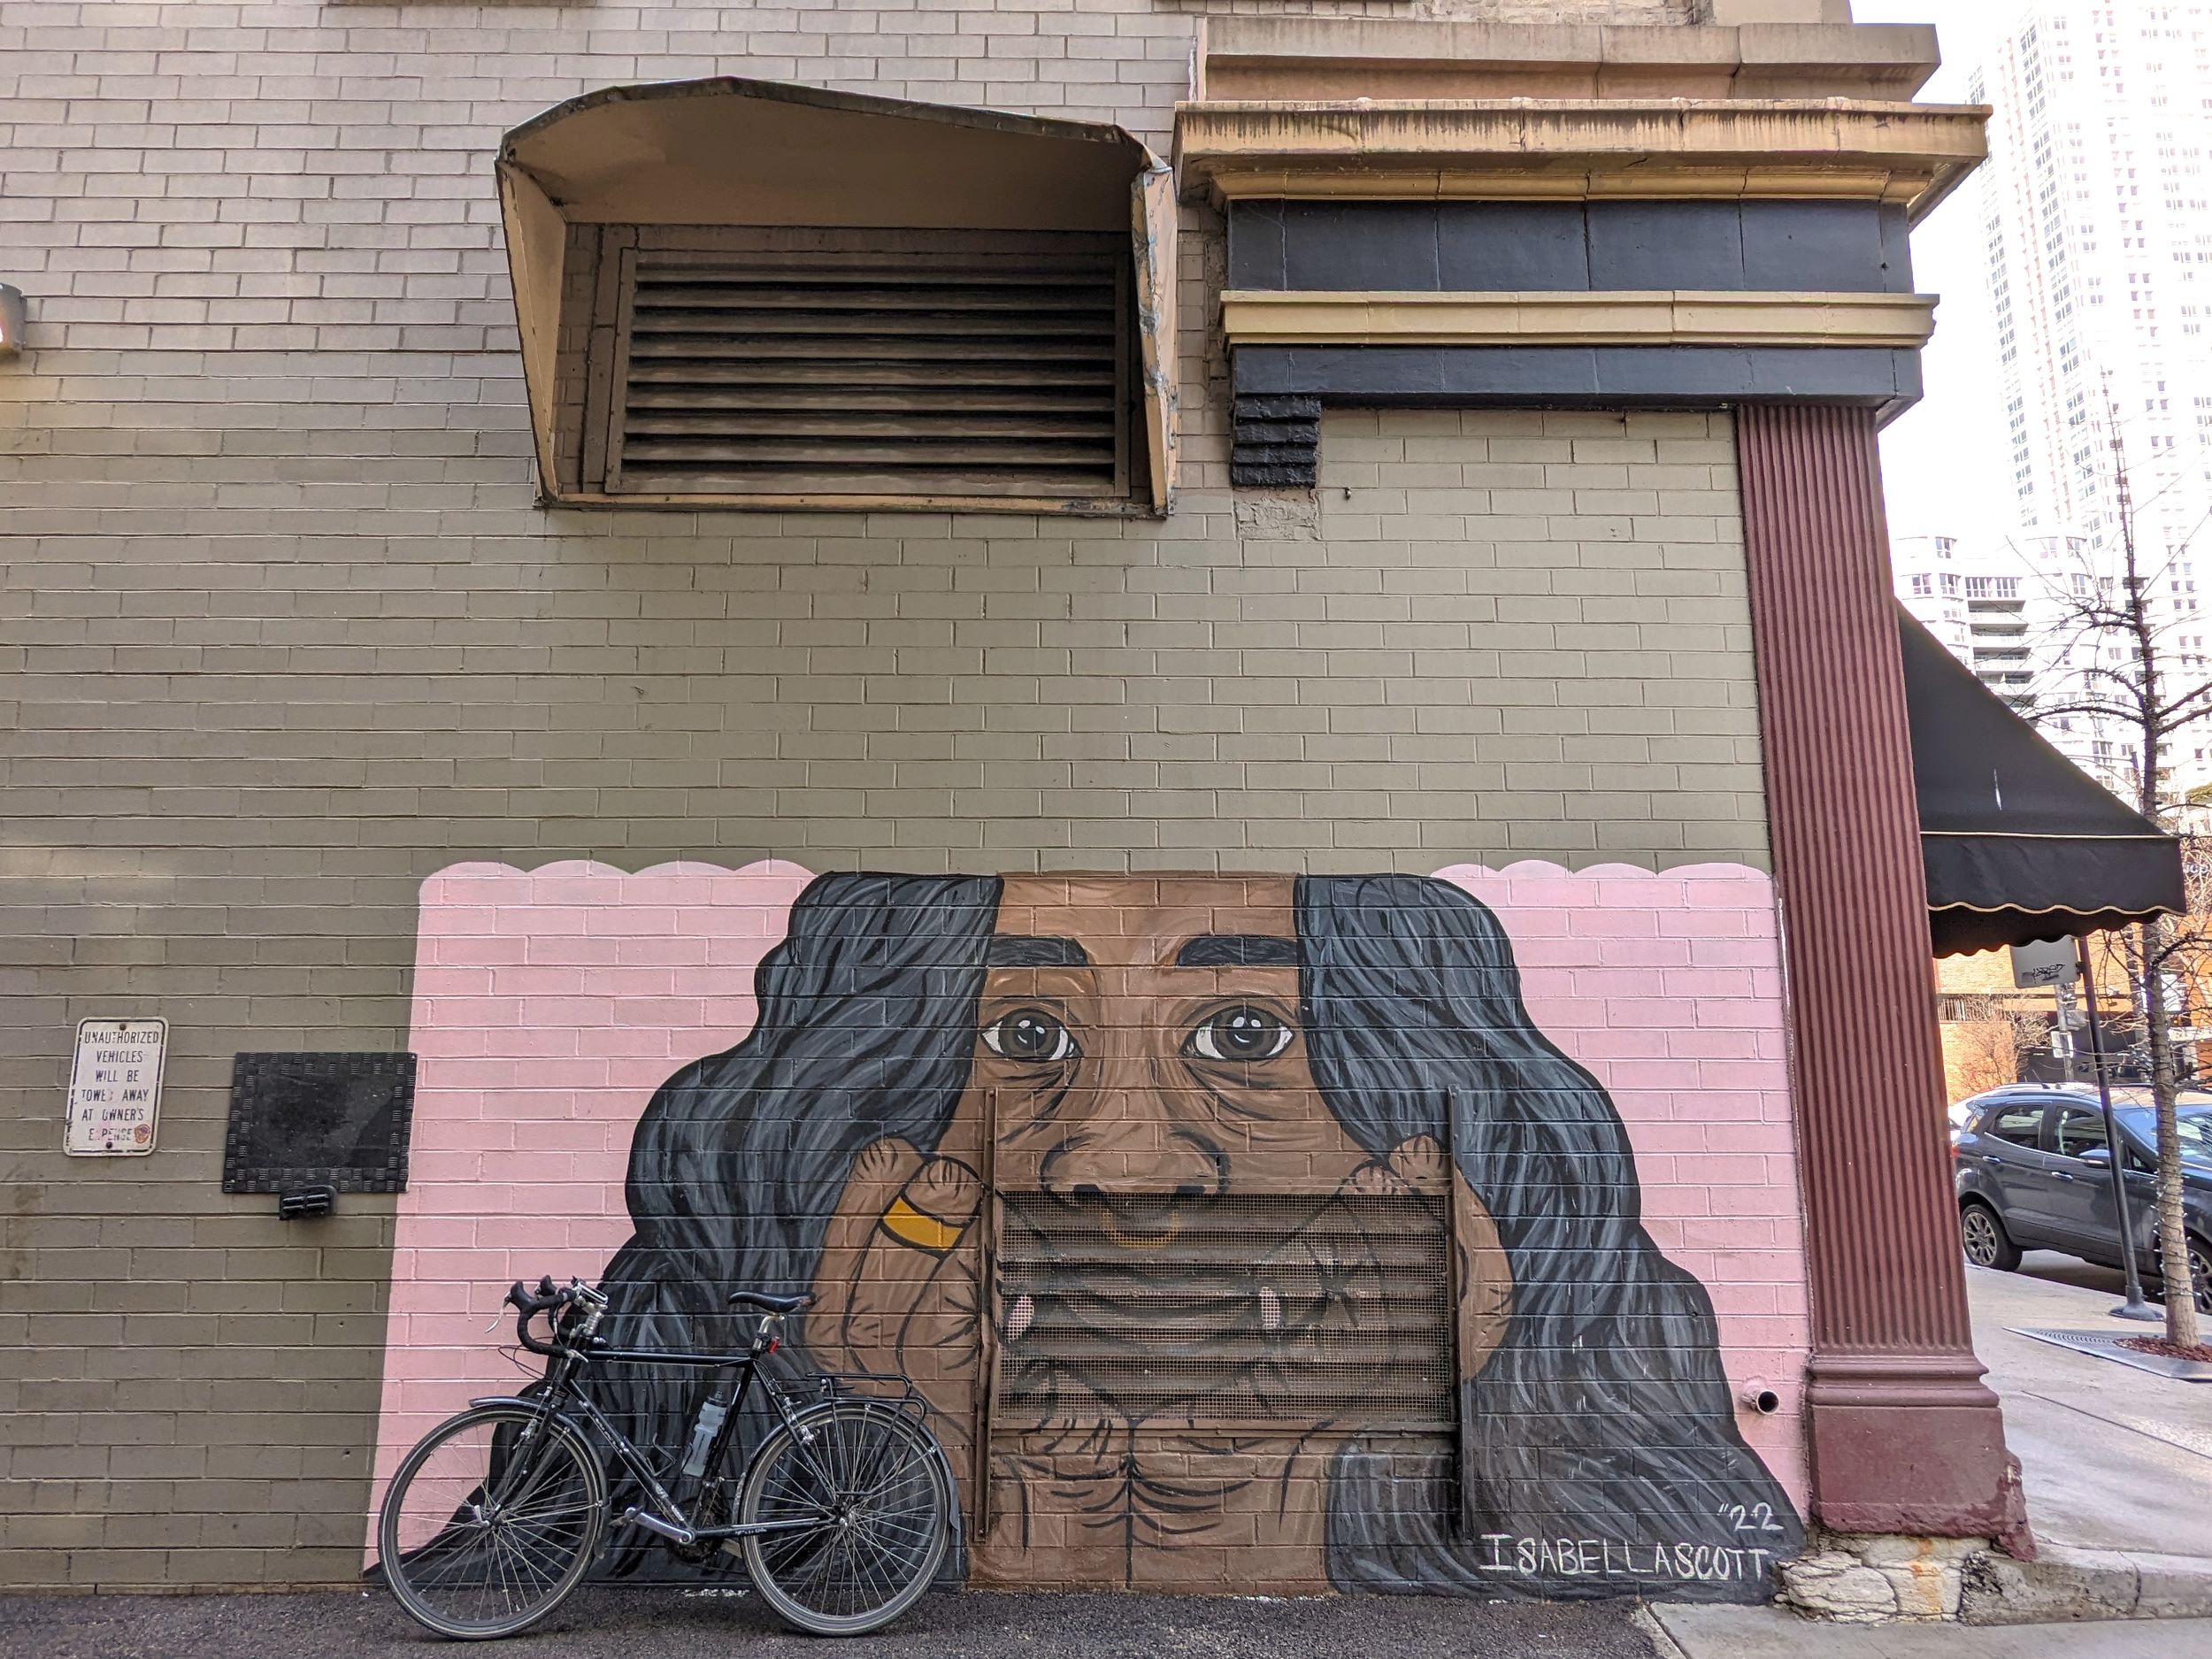 A tour bicycle is leaning on an alley mural of a smiling long wavy haired cartoon Black girl looking at the viewer with her face resting in her hands.